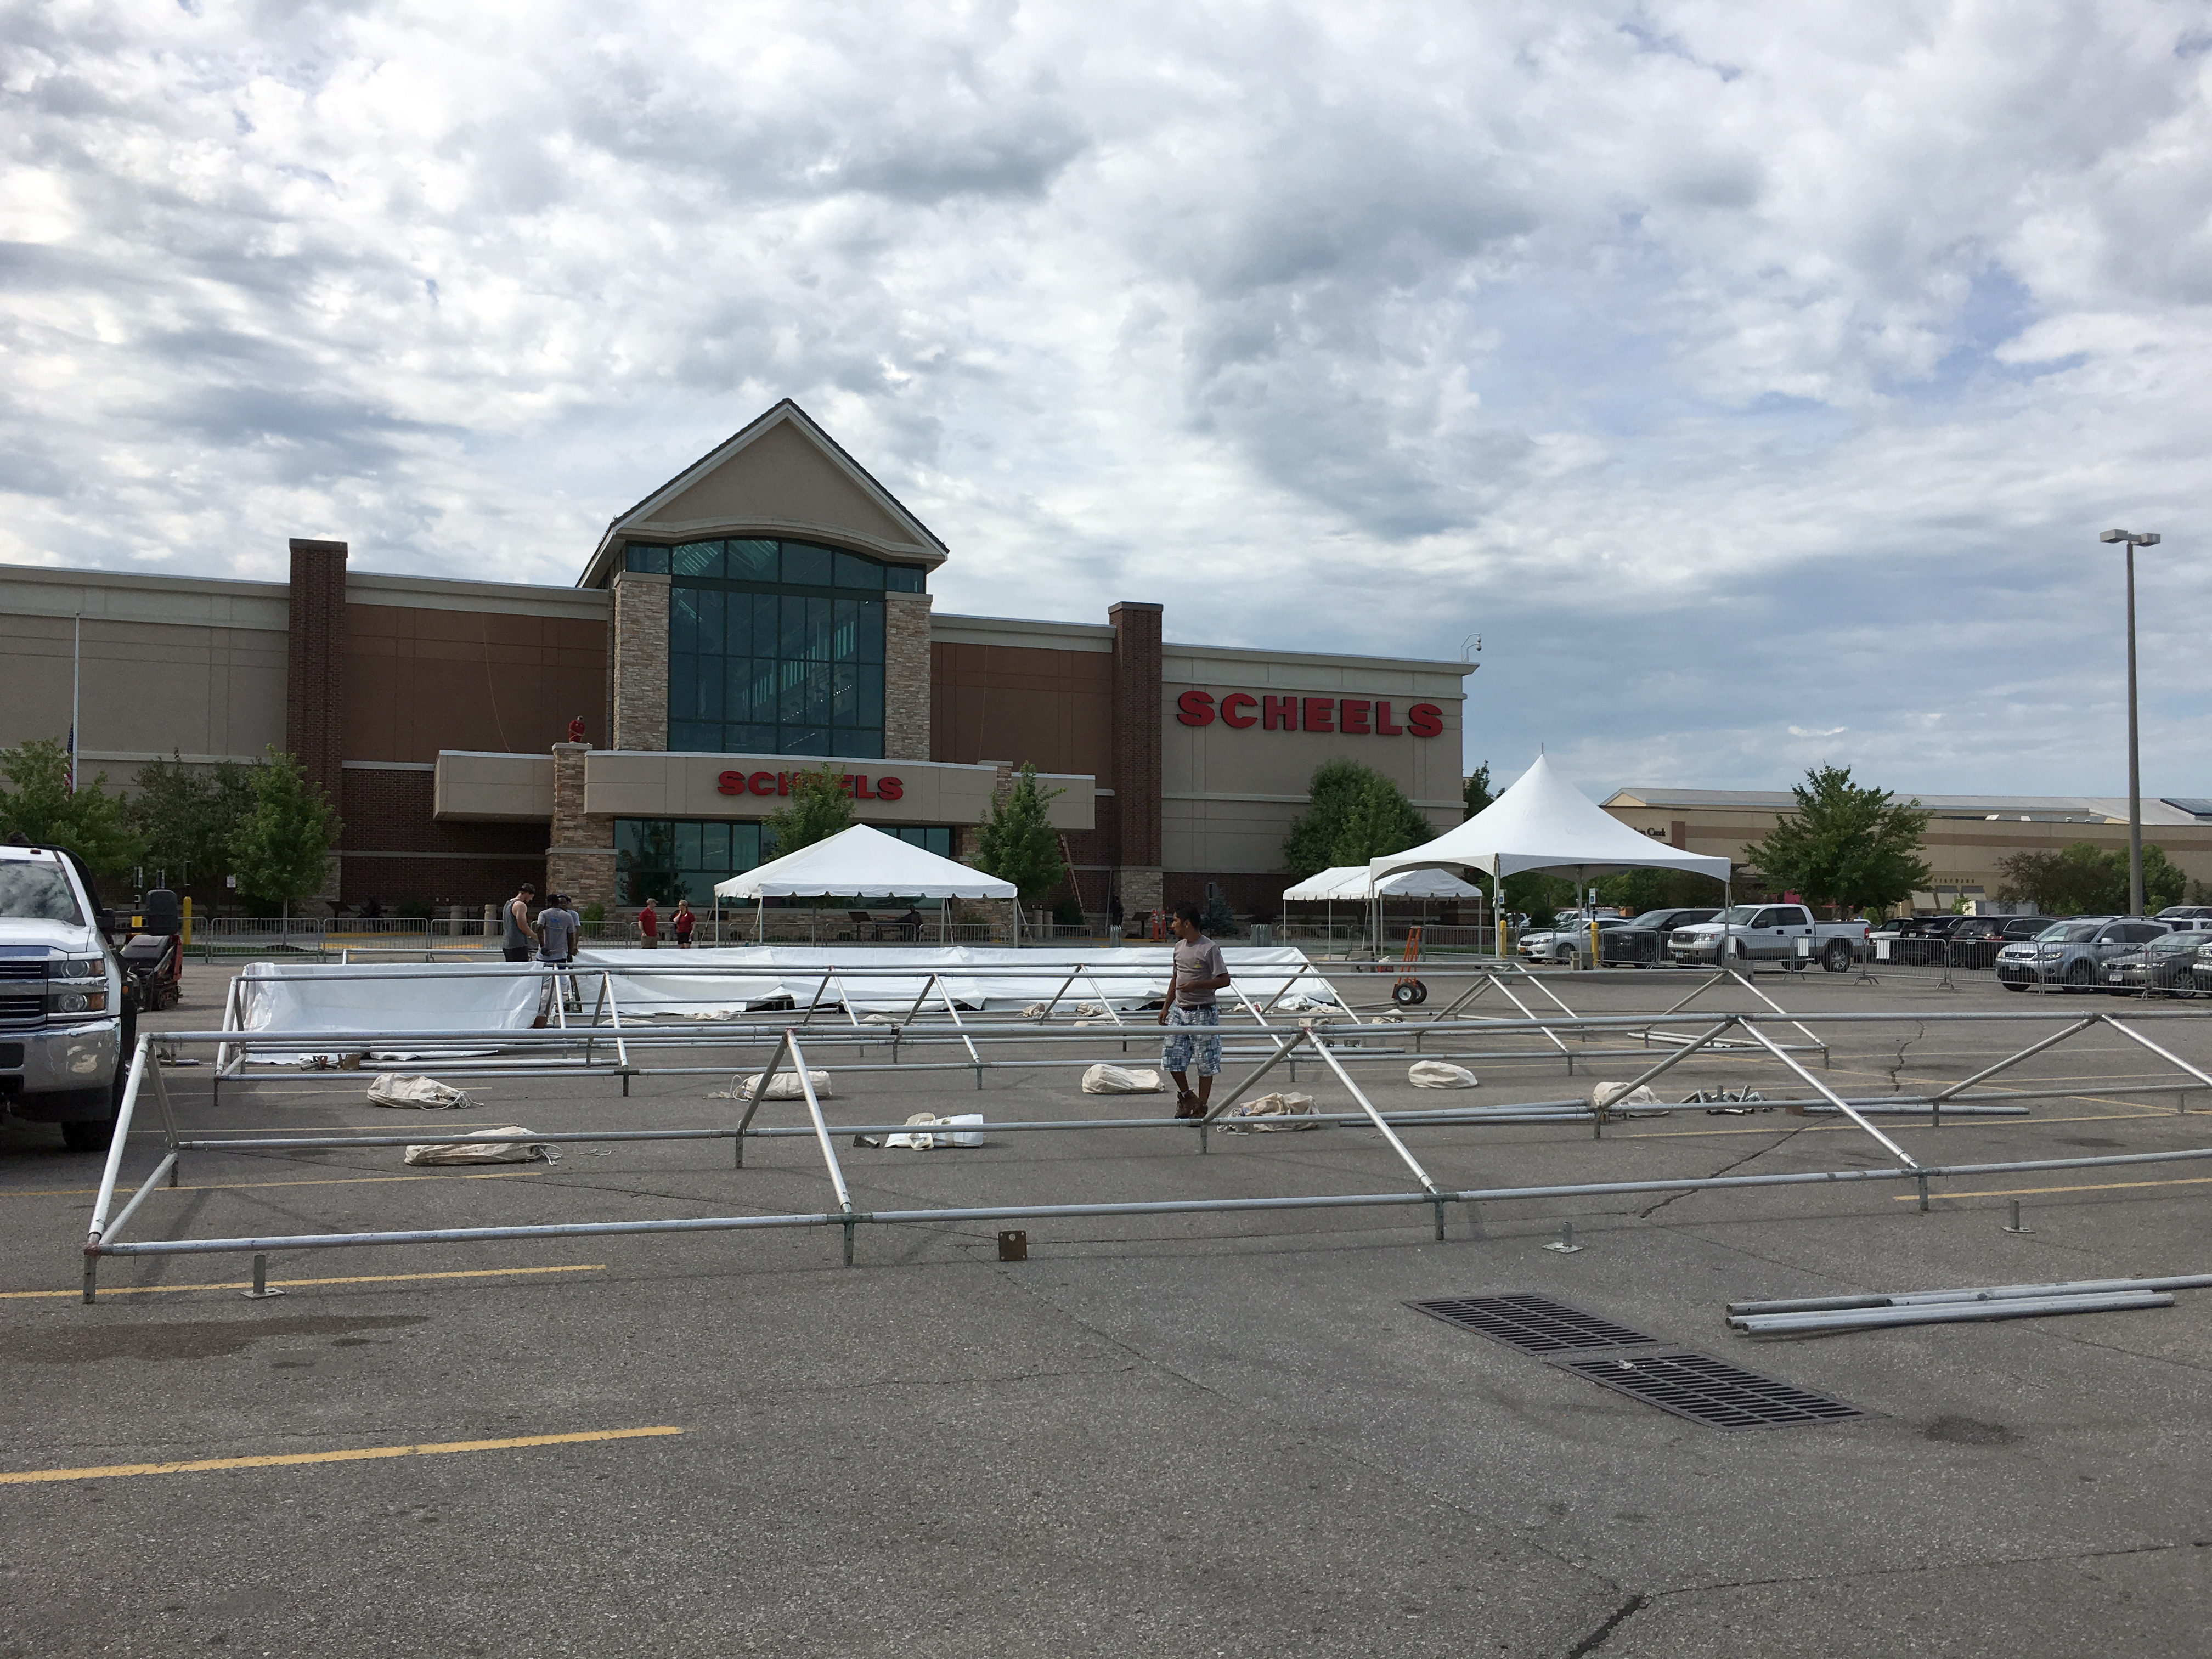 Scheels tent sale & hunting expo in Des Moines, Iowa